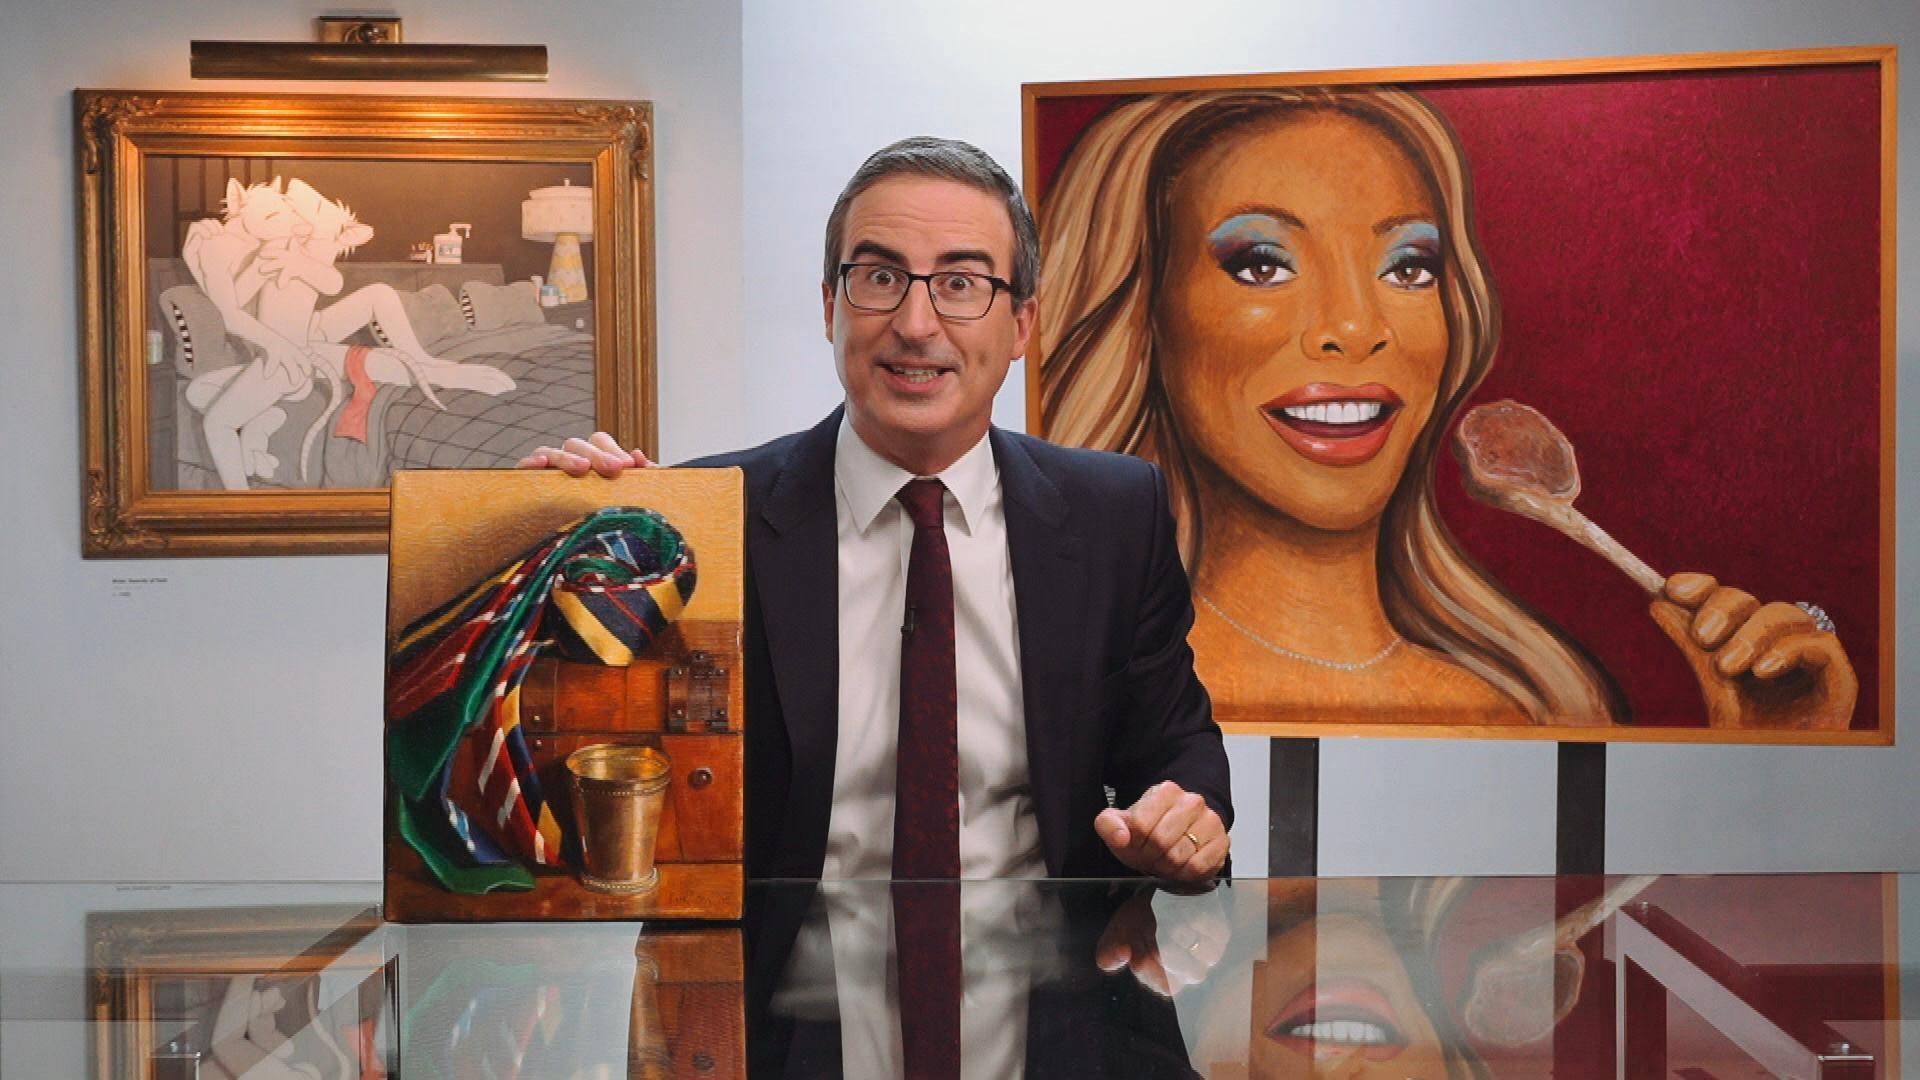 Last Week Tonight with John Oliver TV Shows, John Oliver's quirky purchase, Rat erotica painting, 1920x1080 Full HD Desktop